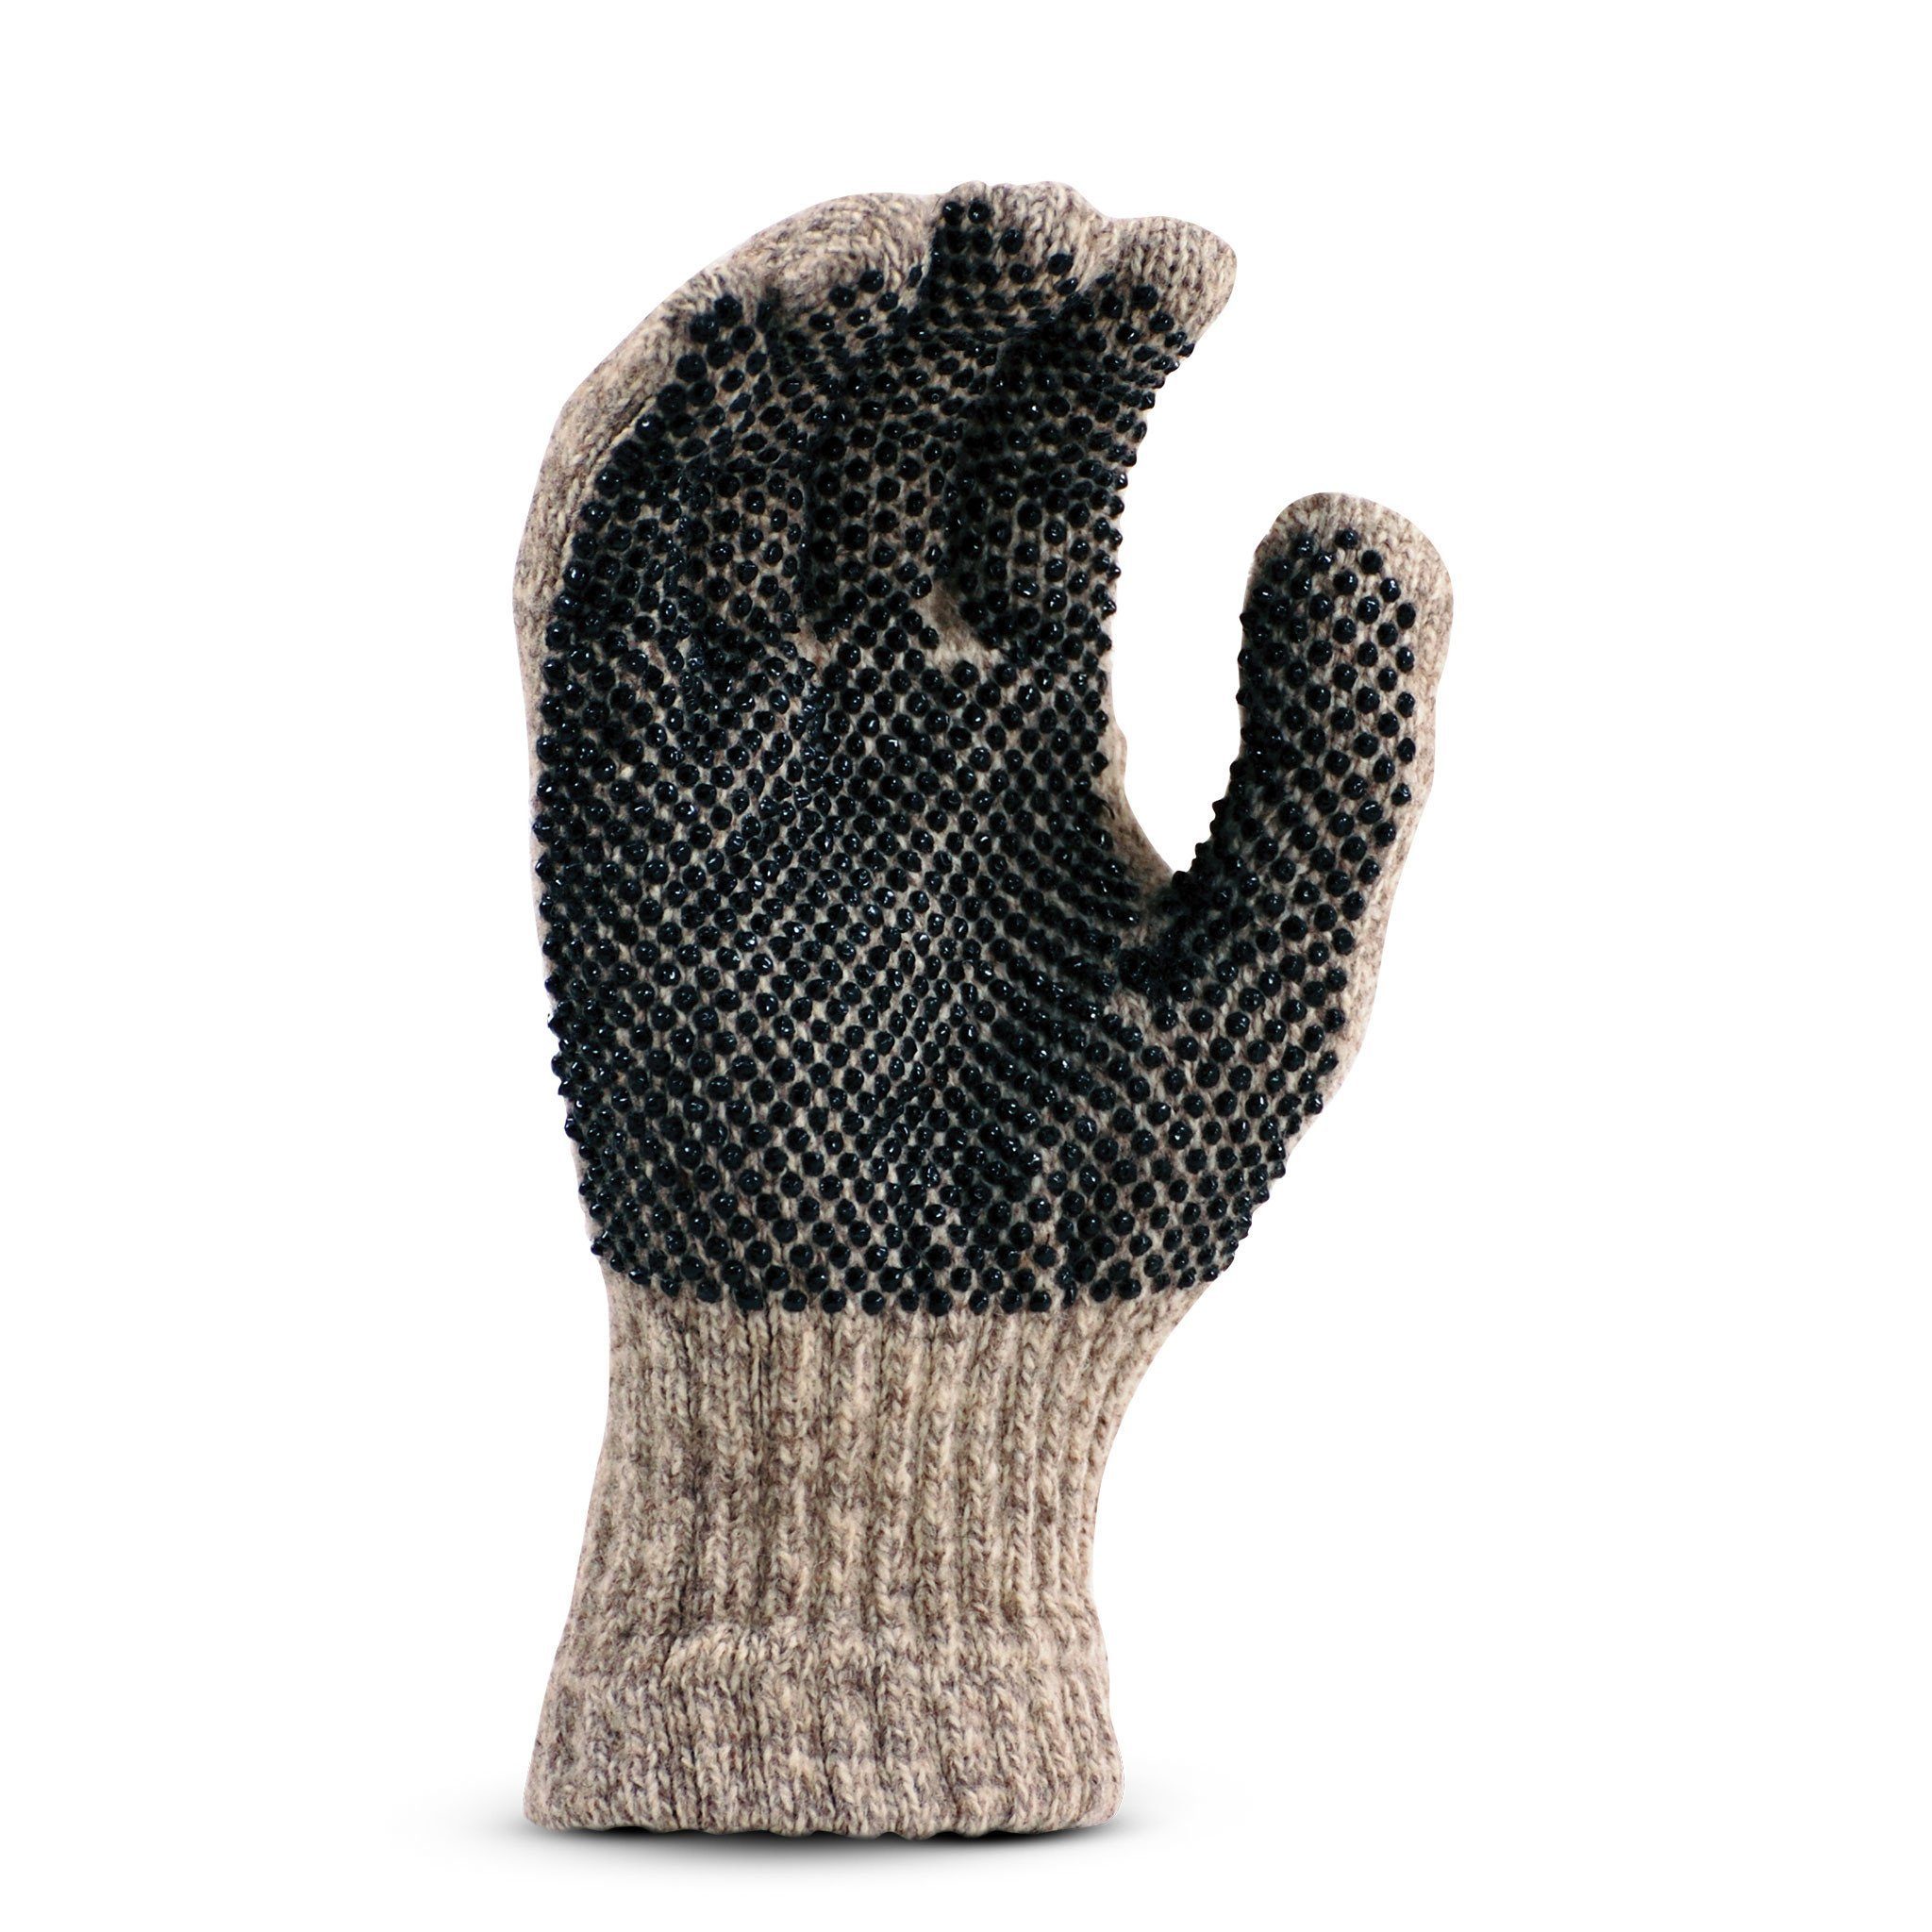 Medium Weight Ragg Wool Seamless Knit Glove With Added PVC Dots